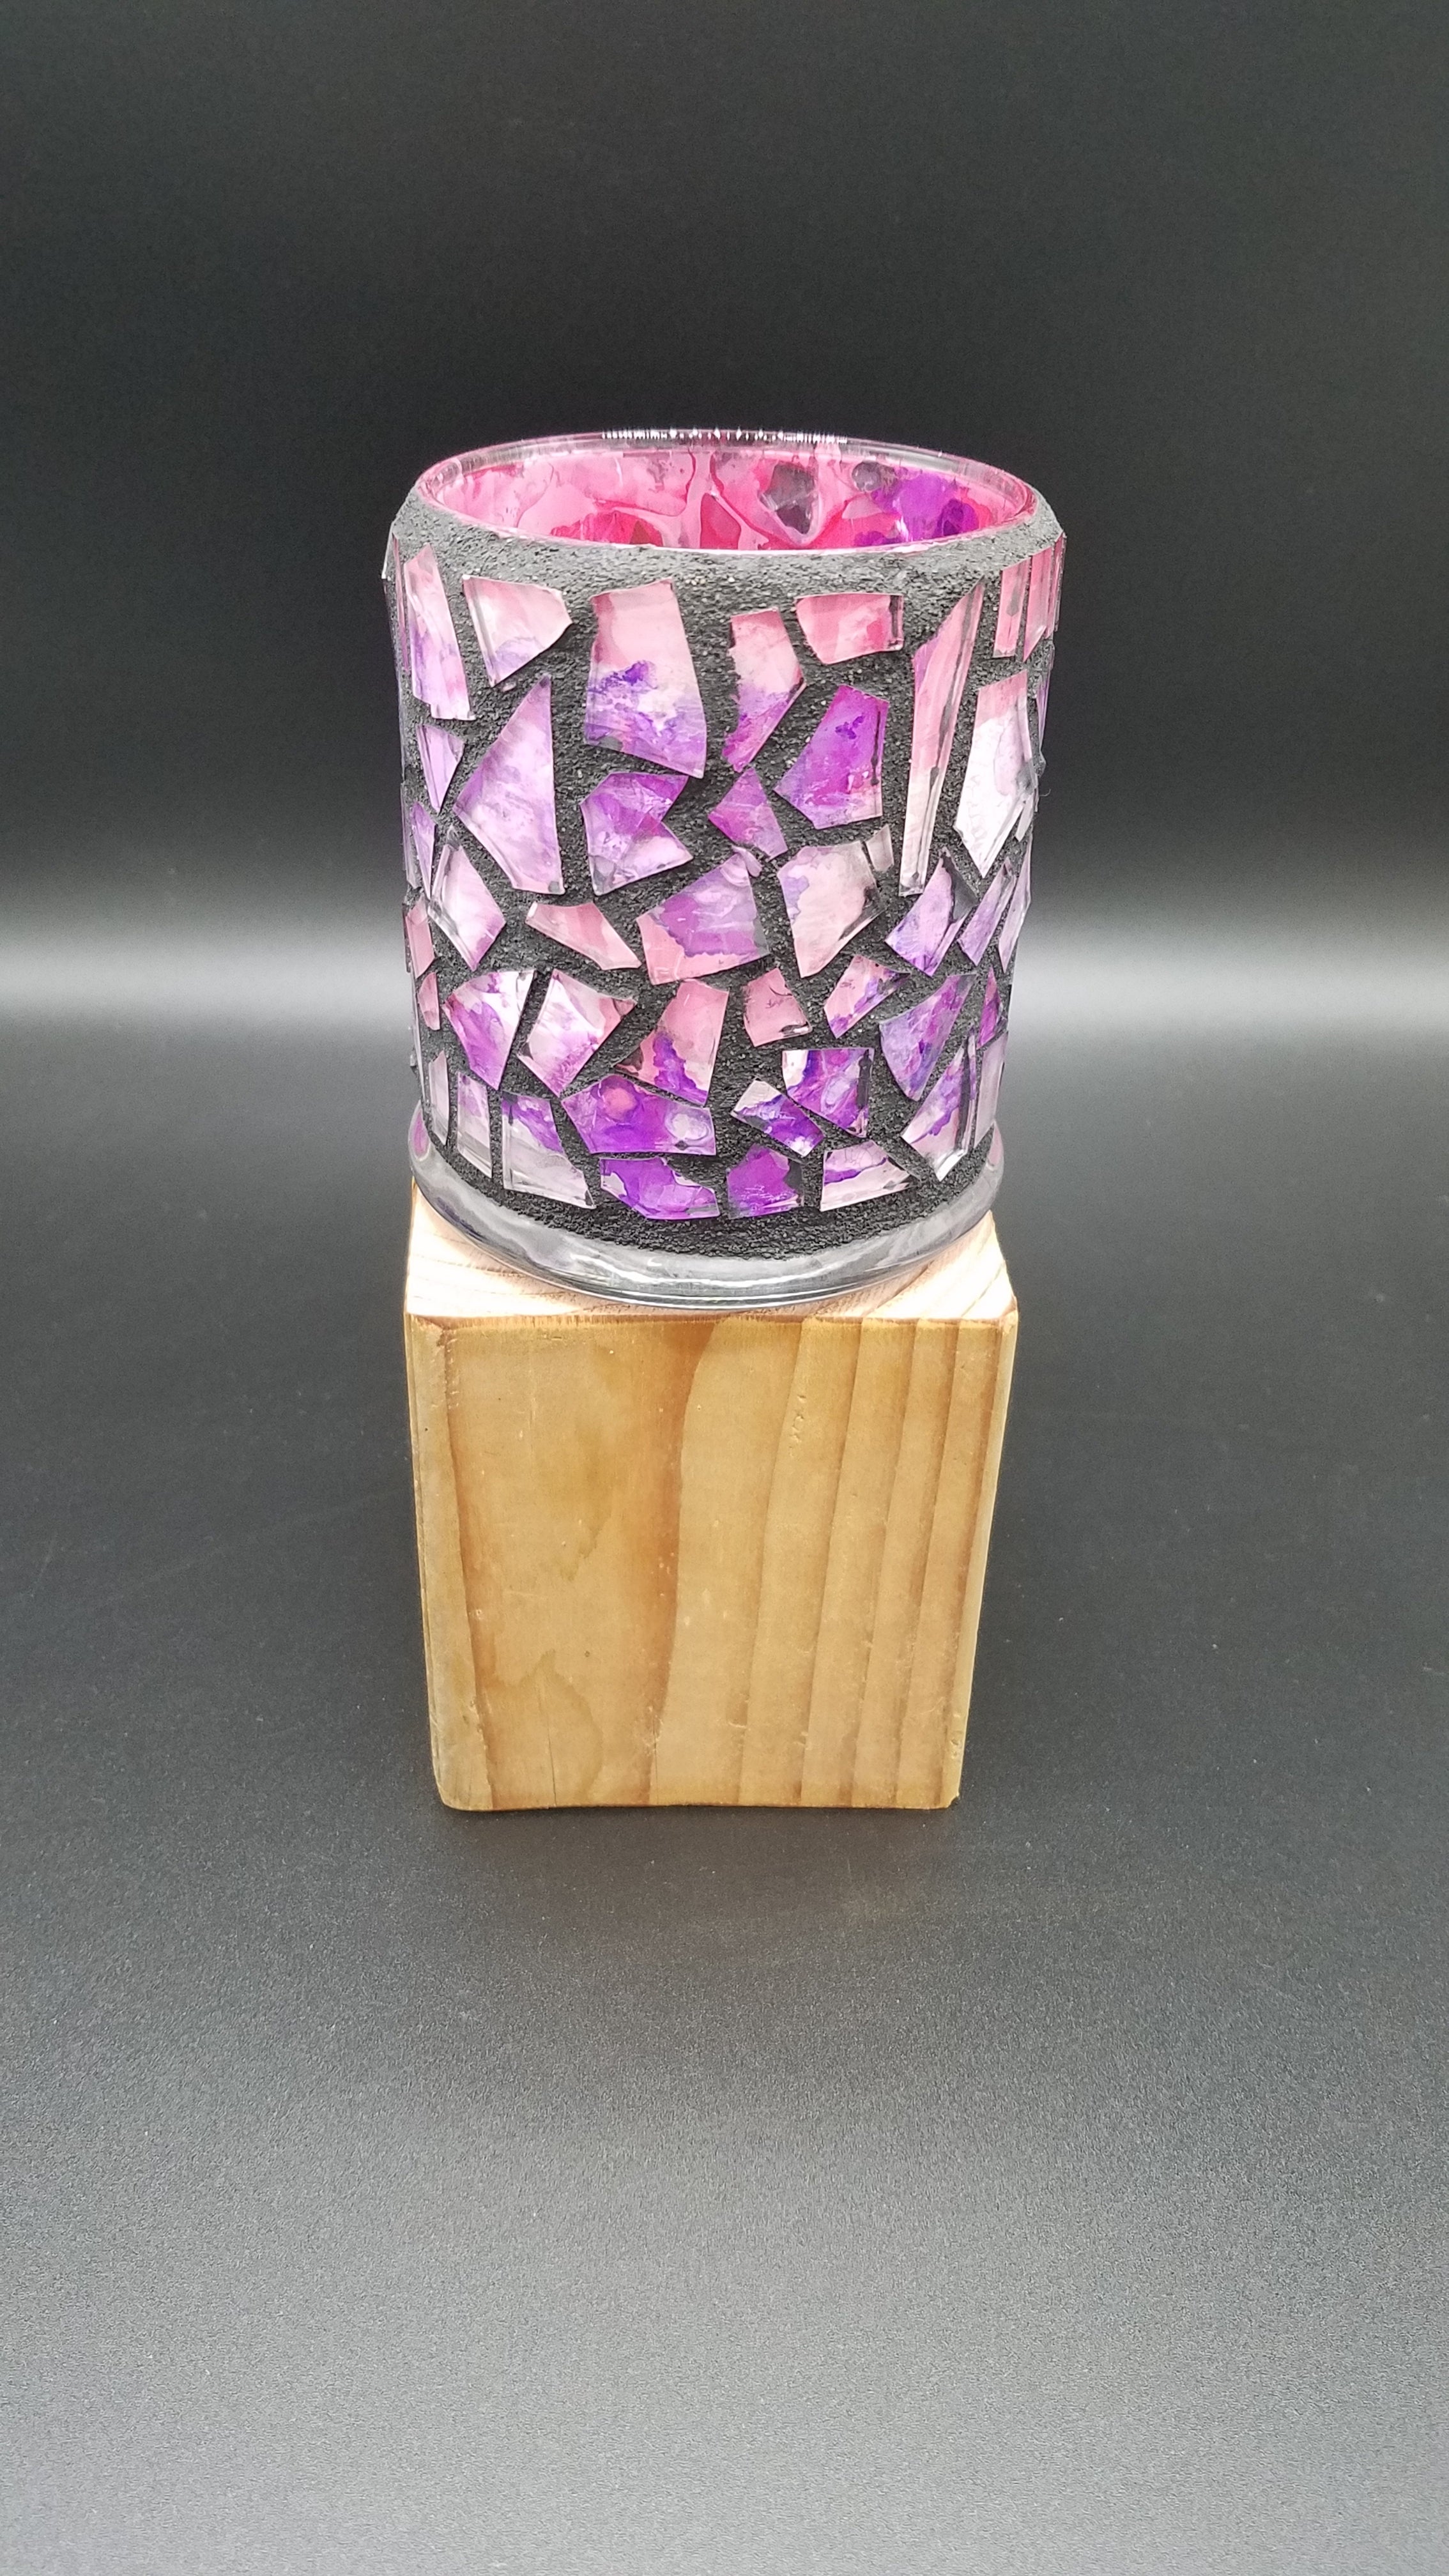 Mosaic Moments - Small Candle Votives